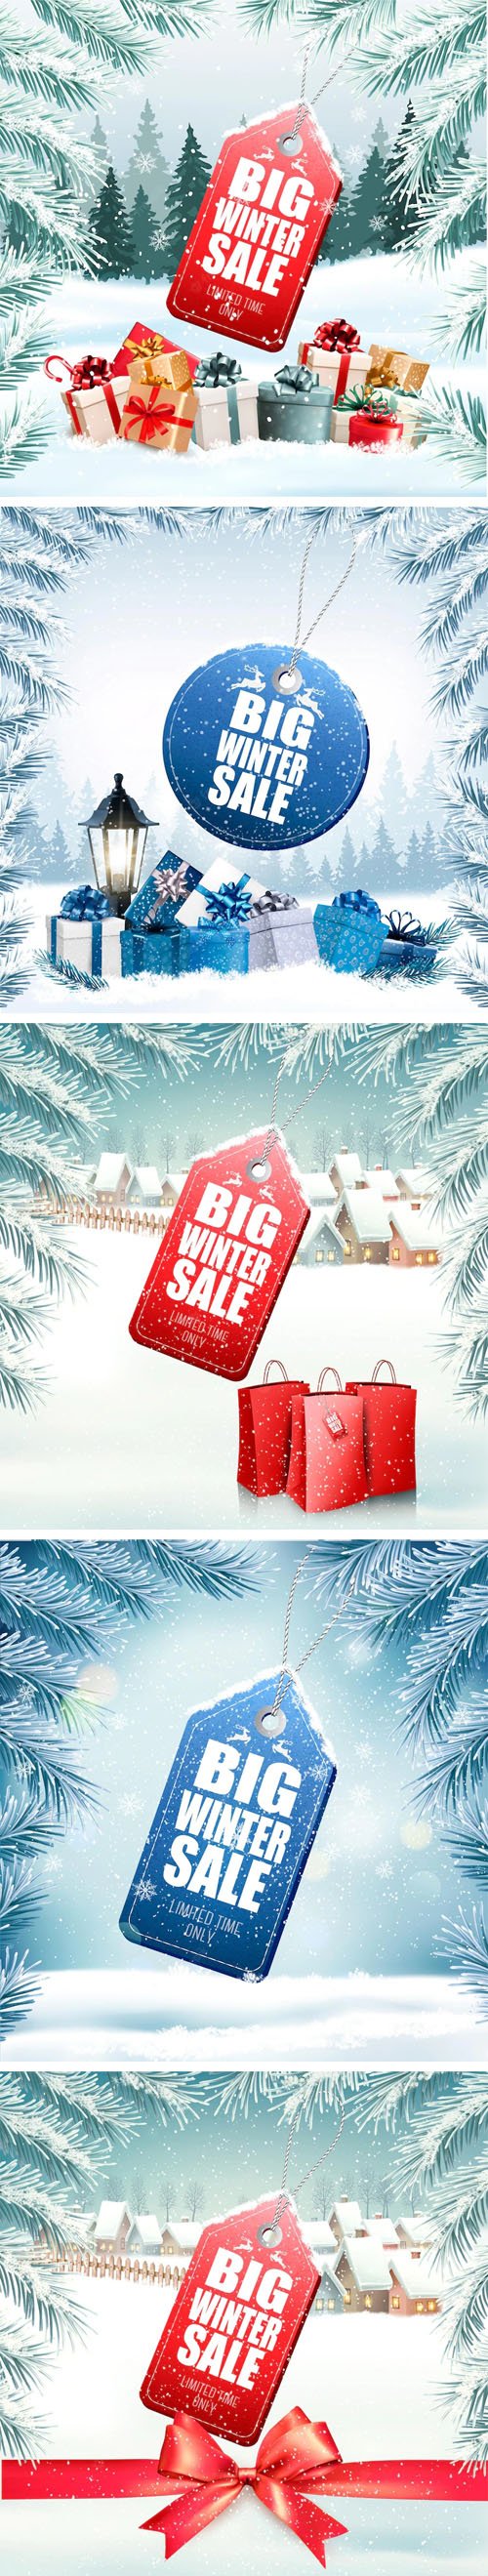 Winter Holiday Sales Tags on Snowy Weather - Vector Templates